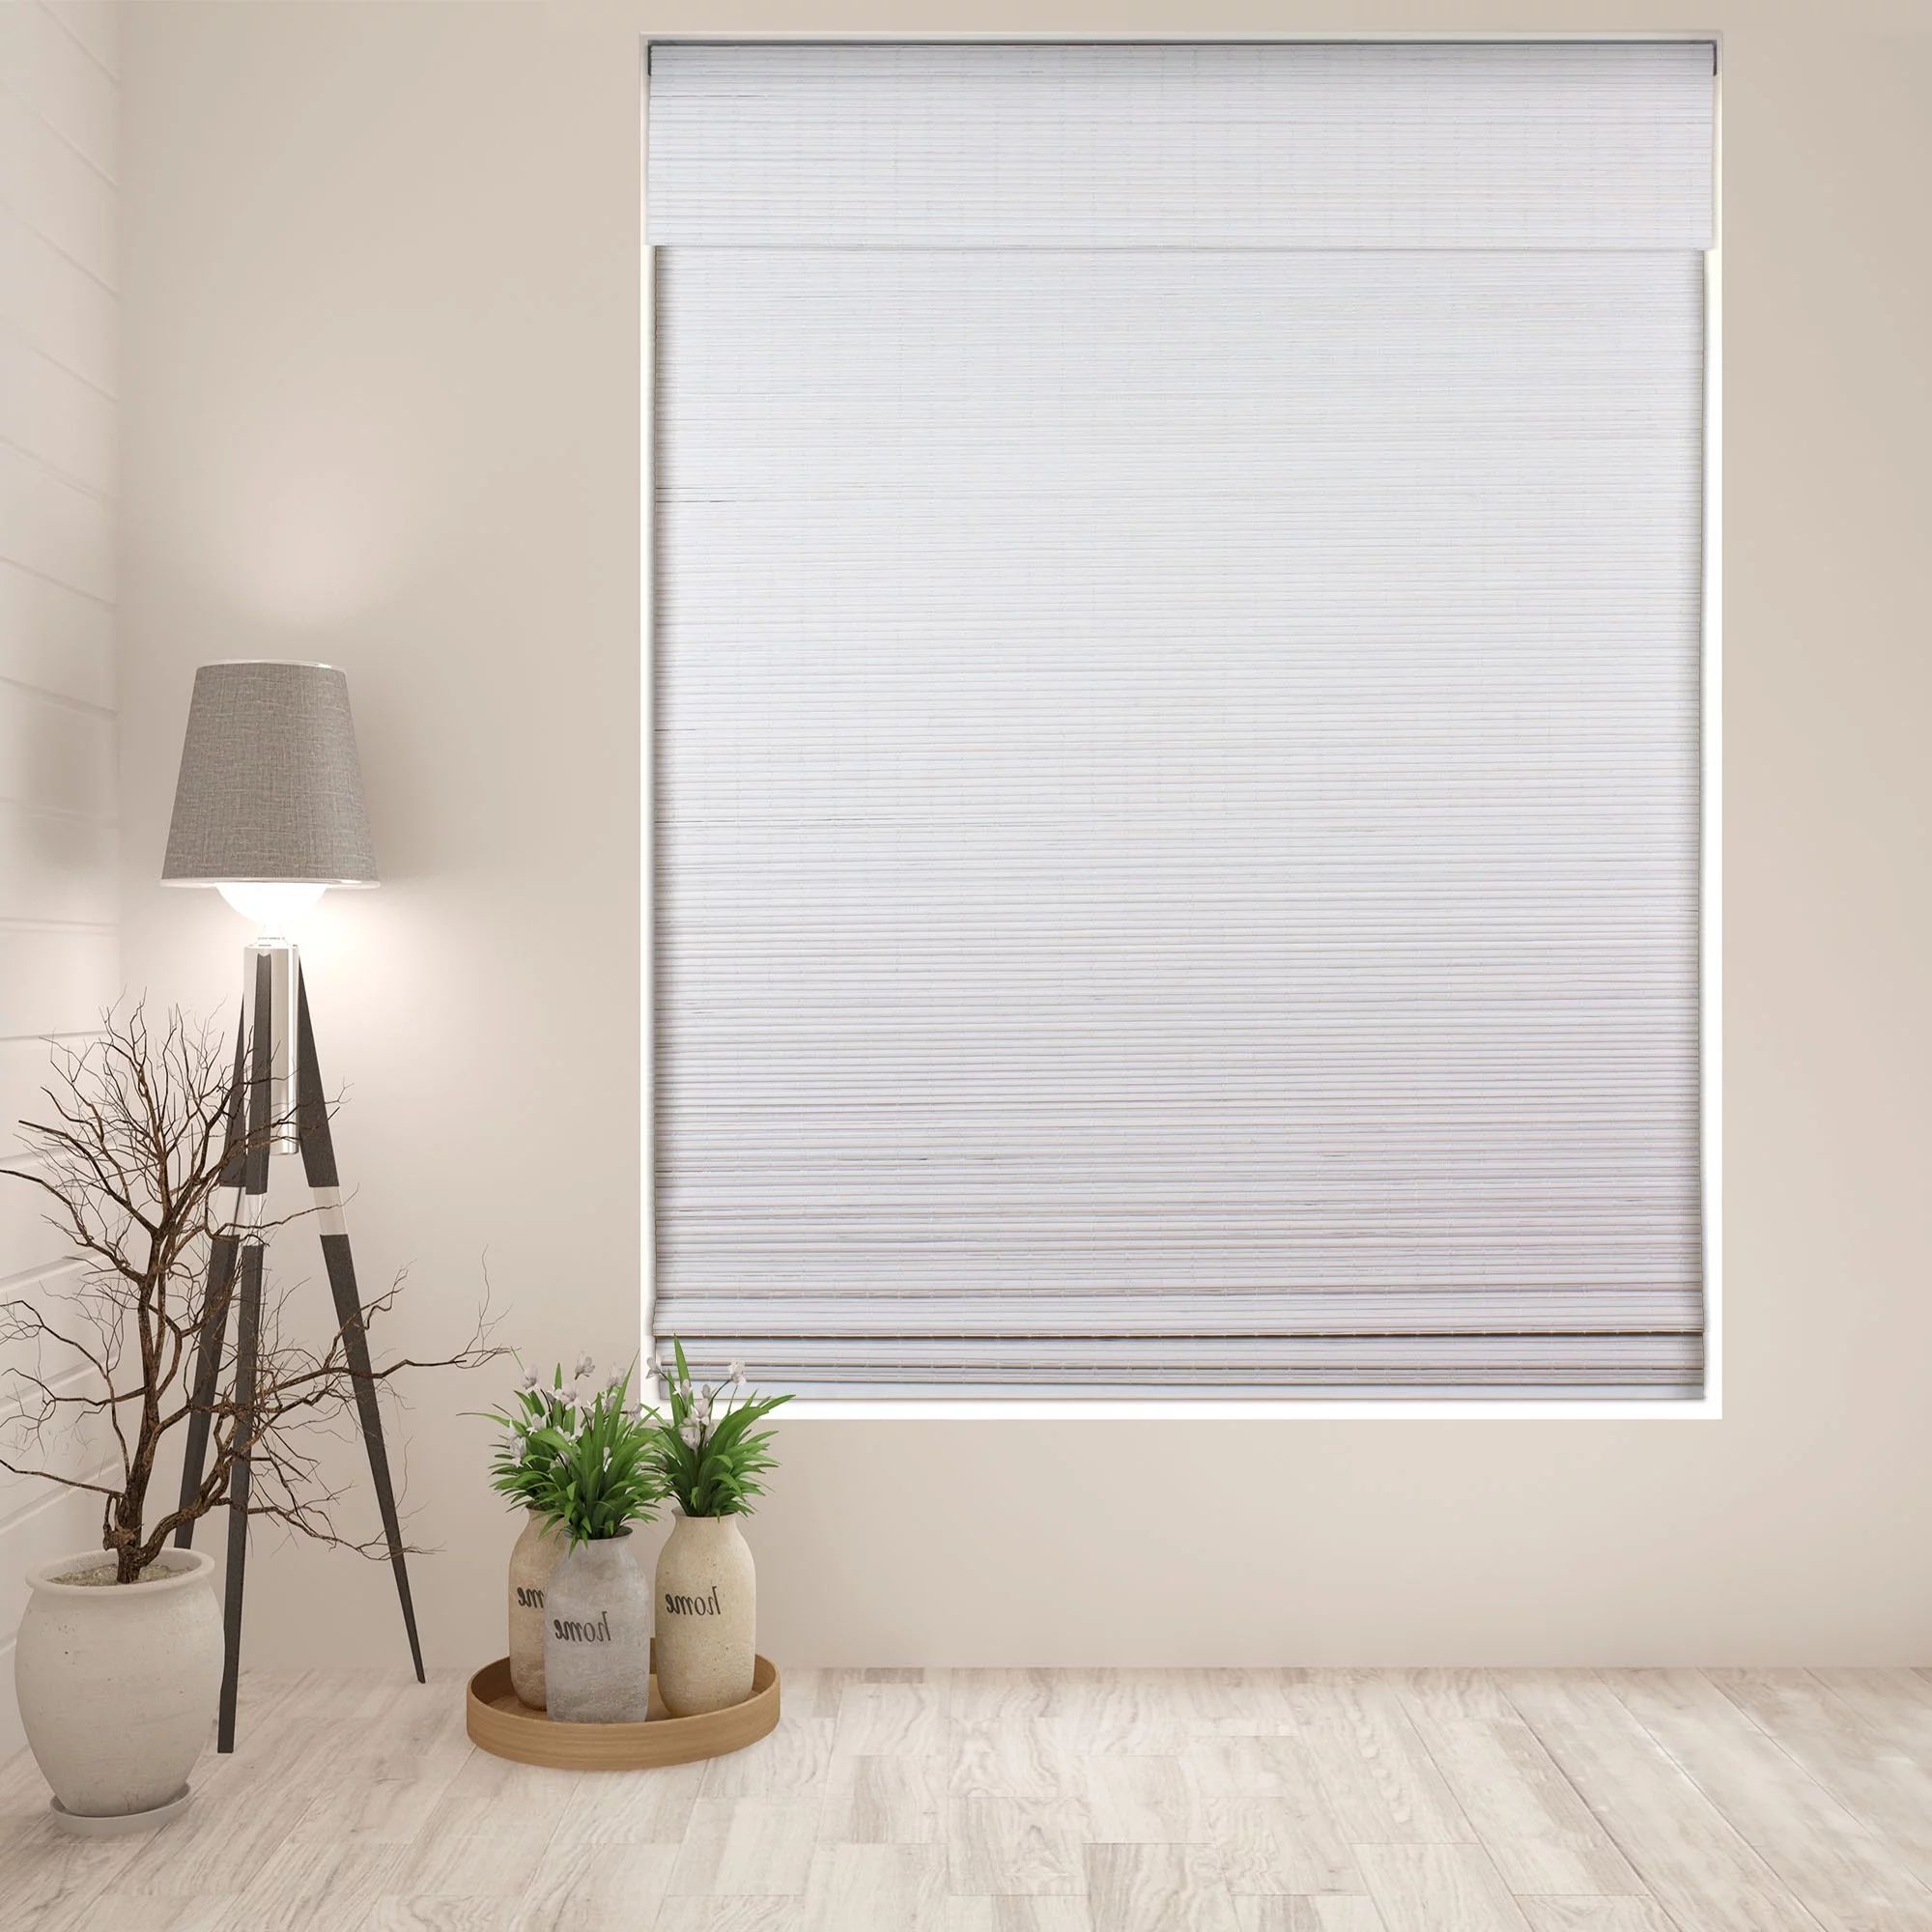 Arlo Blinds Cordless Semi-Privacy White Bamboo Roman Shades Blinds - Size: 34.5"W x 60"H | Walmart (US)